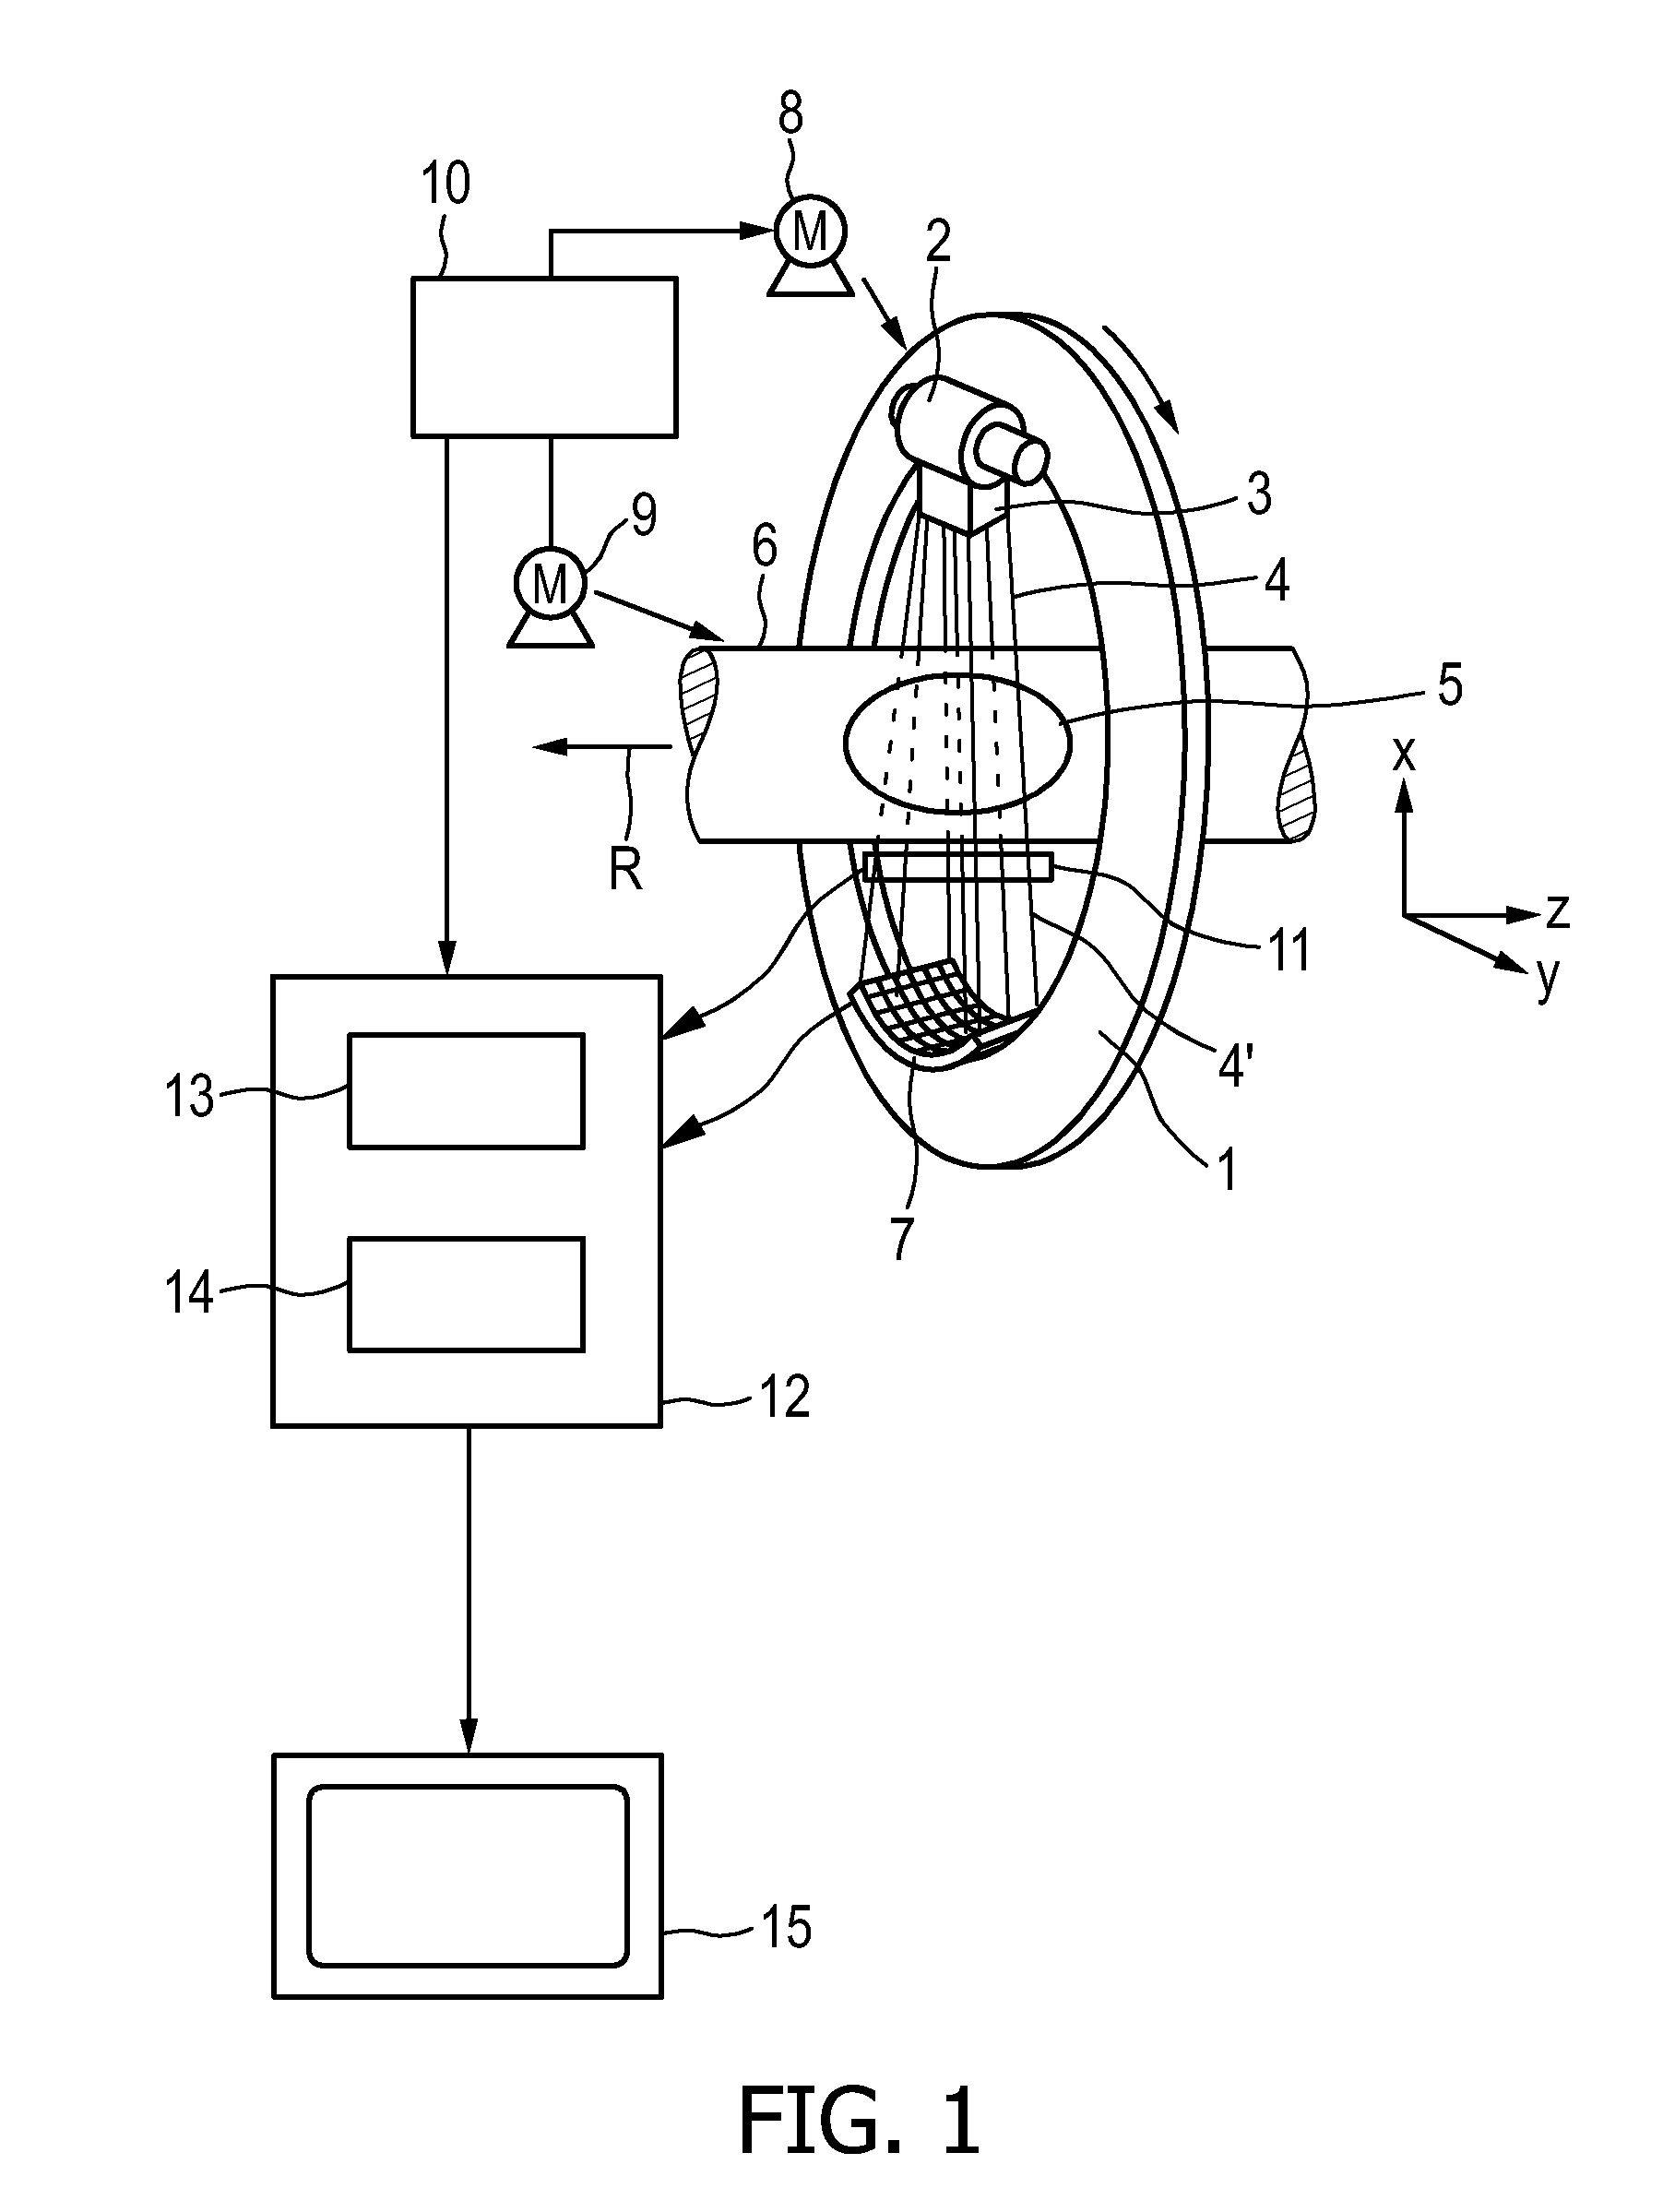 Device and method for generating soft tissue contrast images